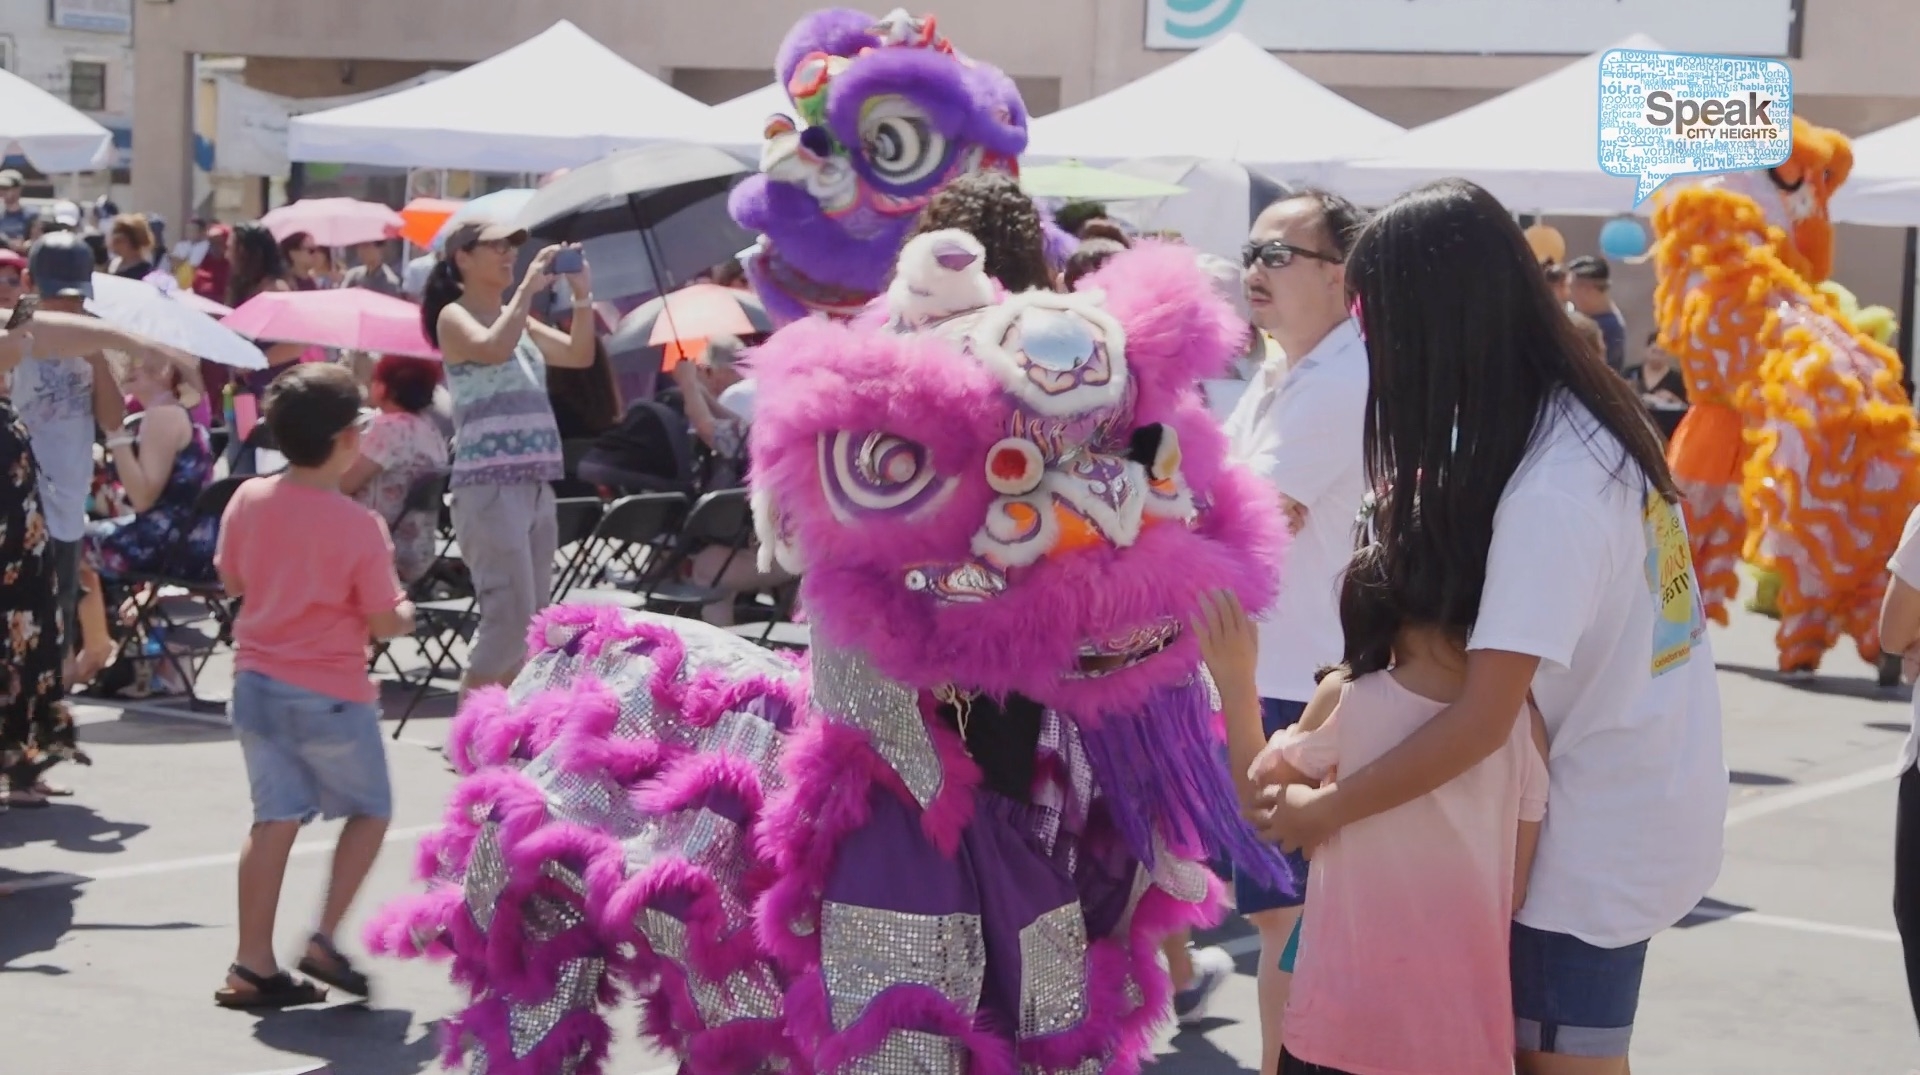 Lantern Festival brings people from different cultures together